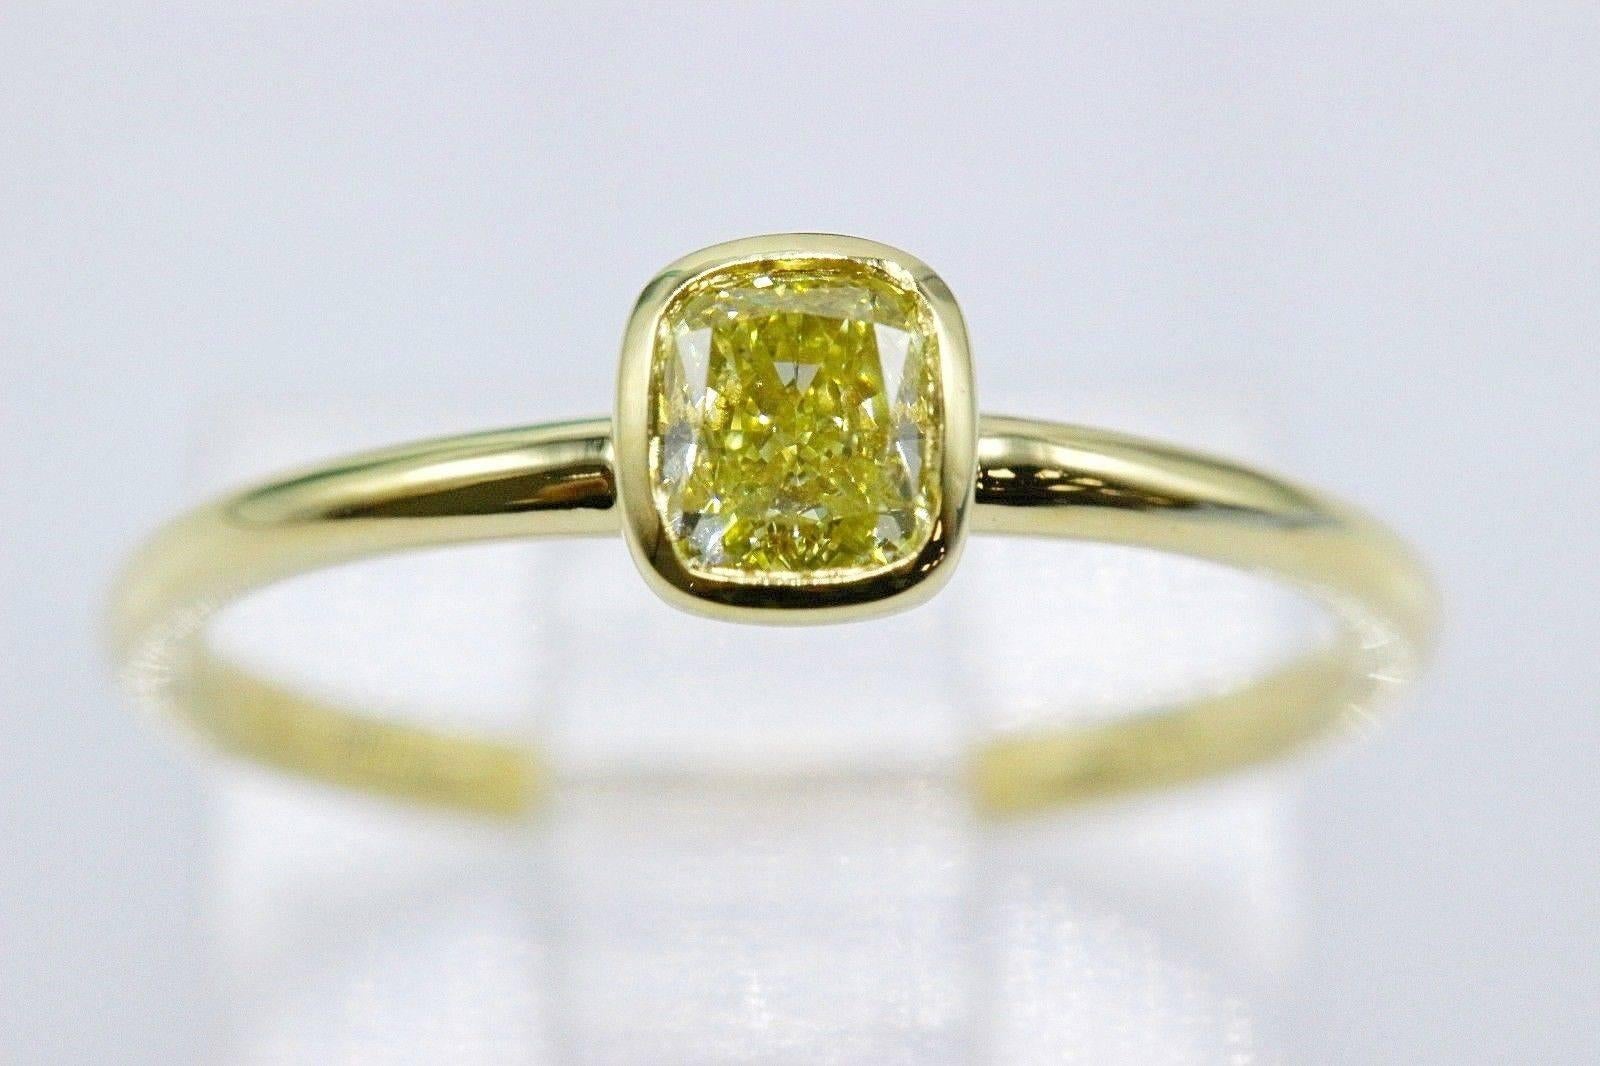 Tiffany & Co.
Style:  Bezet Fancy Intense Yellow Diamond Ring
Serial Number:  #31940079 / O04161797
Metal:  18KT Yellow Gold
Size:  4.25 - sizable  
Total Carat Weight:  0.41 CTS
Diamond Shape:  Cushion Modified Brilliant
Diamond Color & Clarity: 